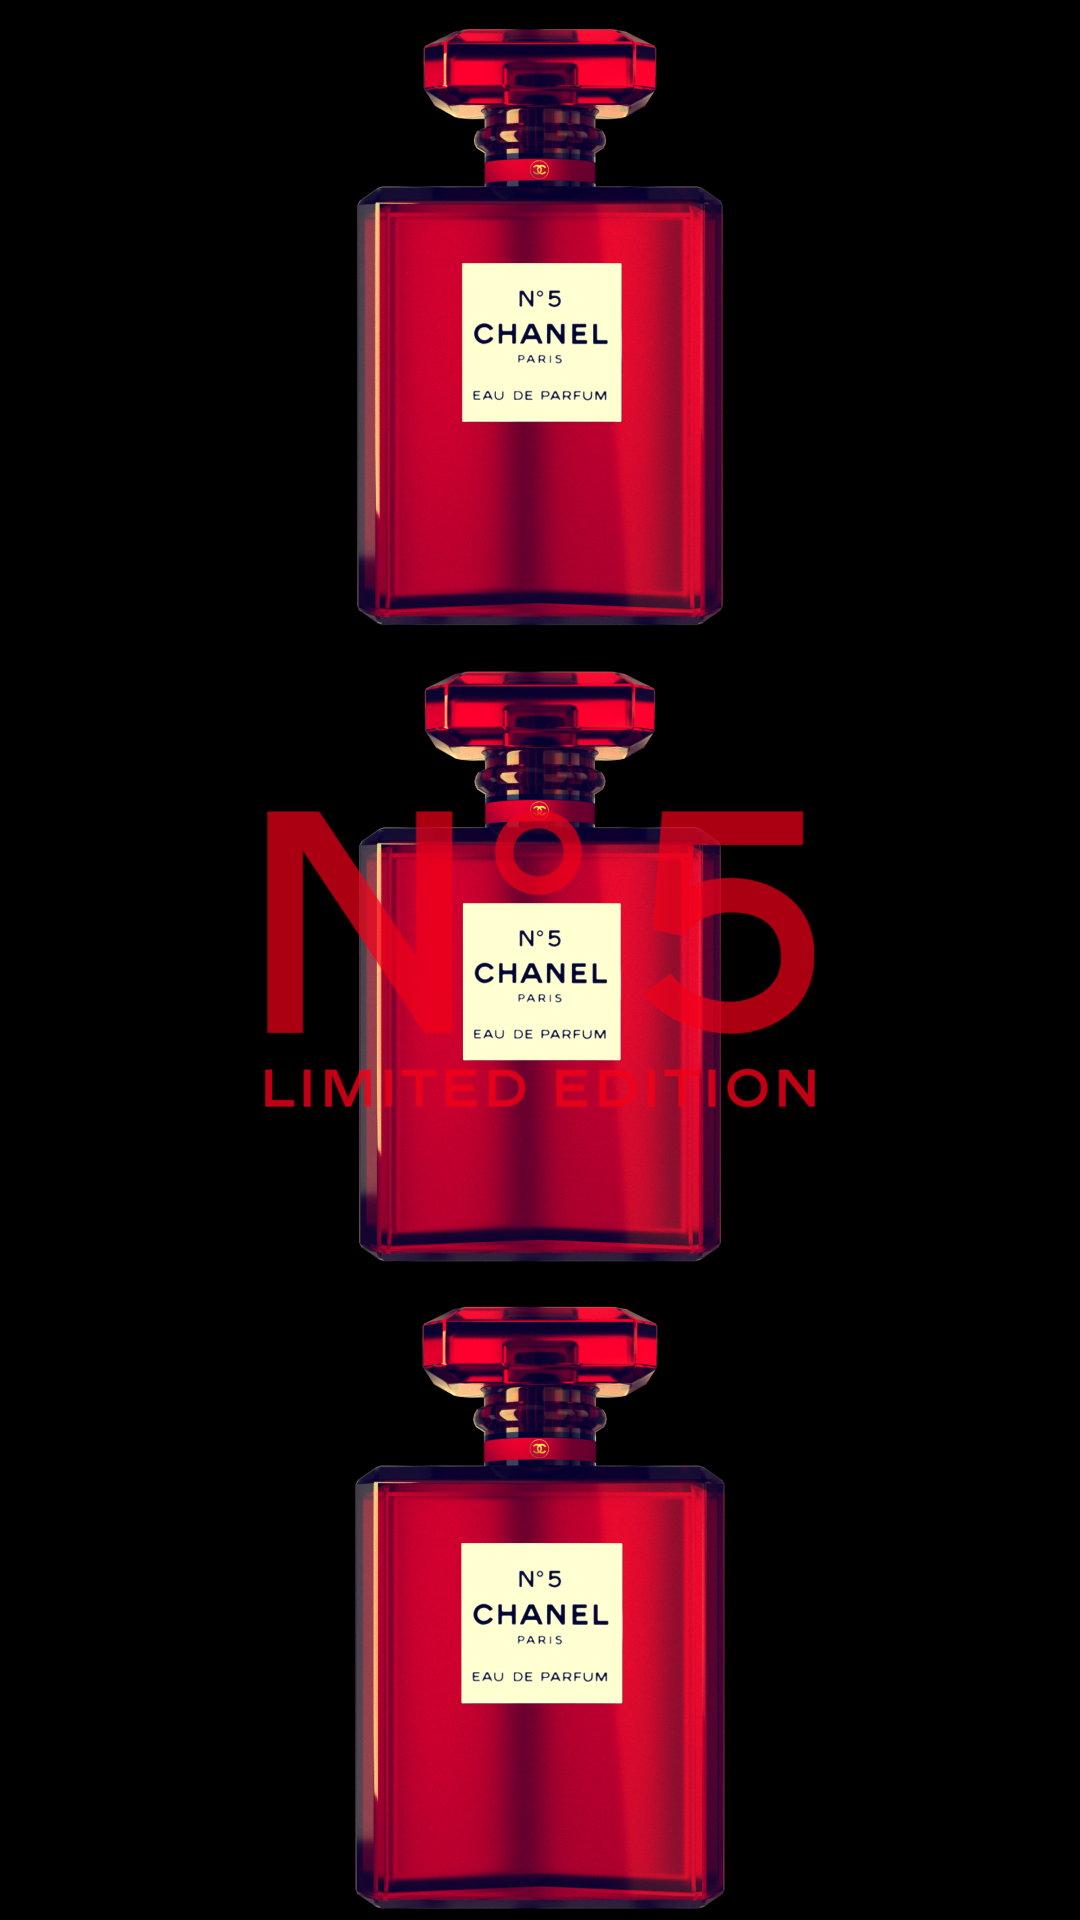 Chanel N°5 Limited Edition + Chanel Coco Noir — Ines Leite